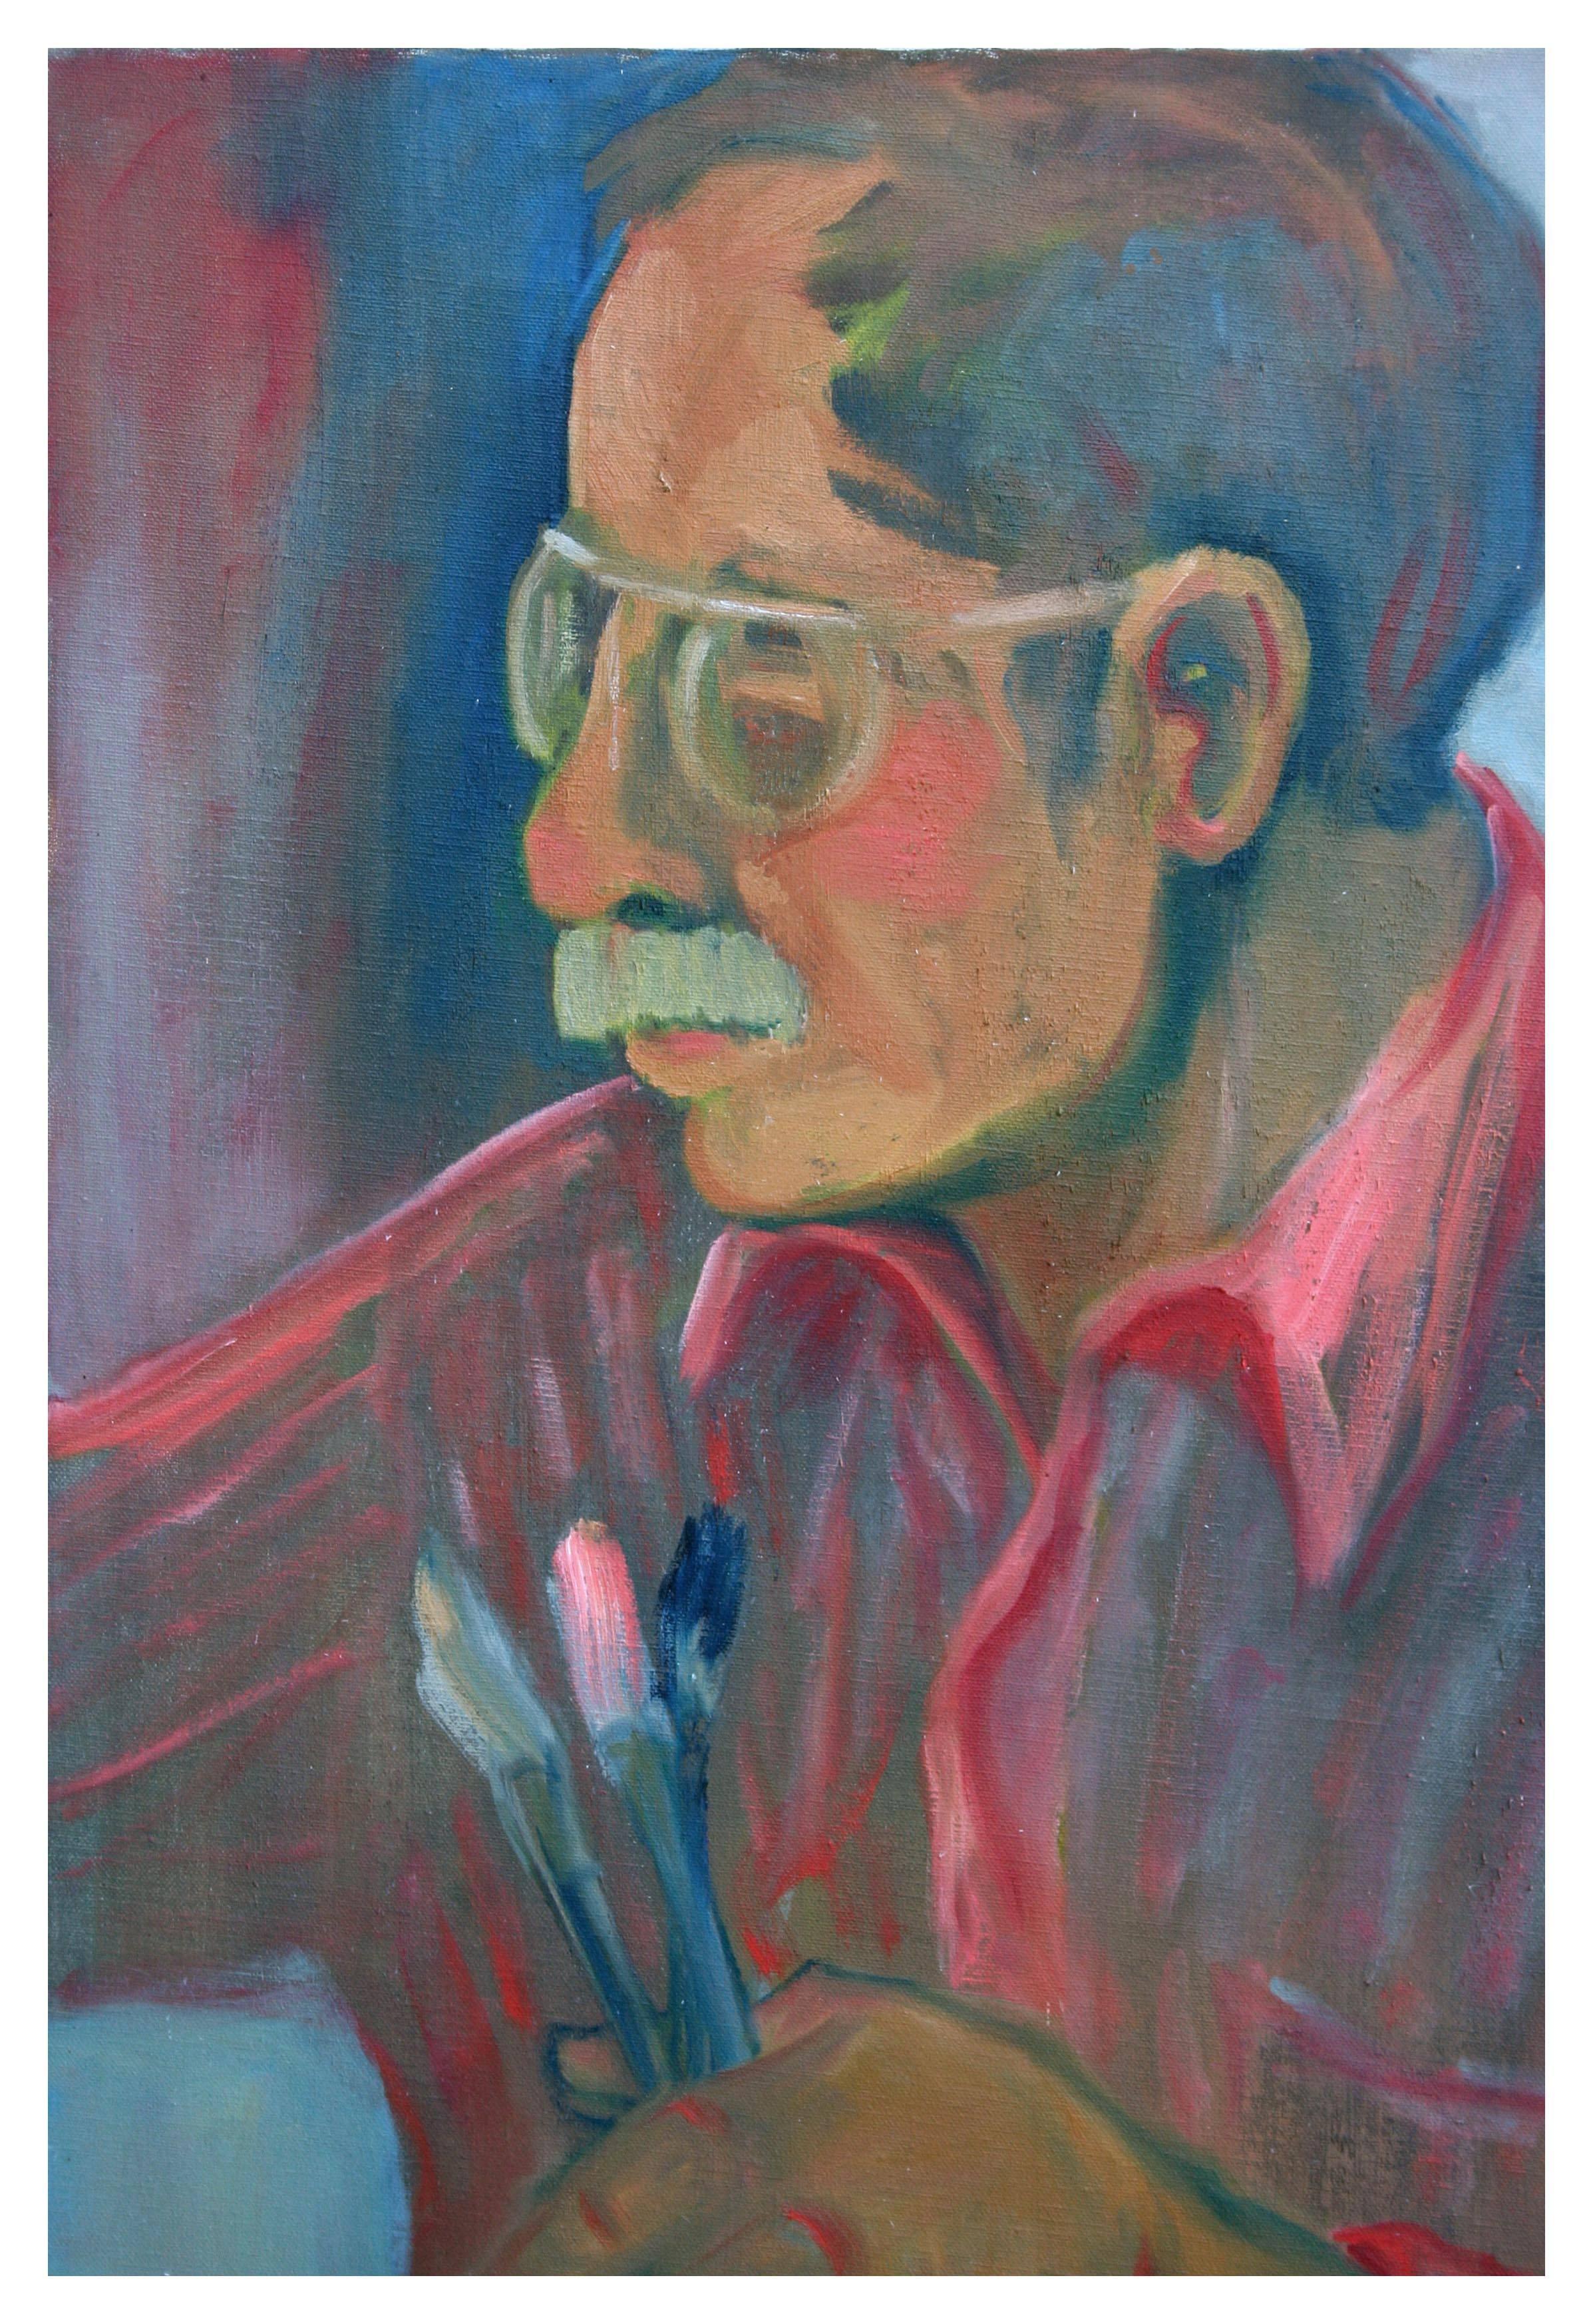 Vintage Abstract Expressionist -- An Artist and His Tools - Painting by Molly E. Brubaker